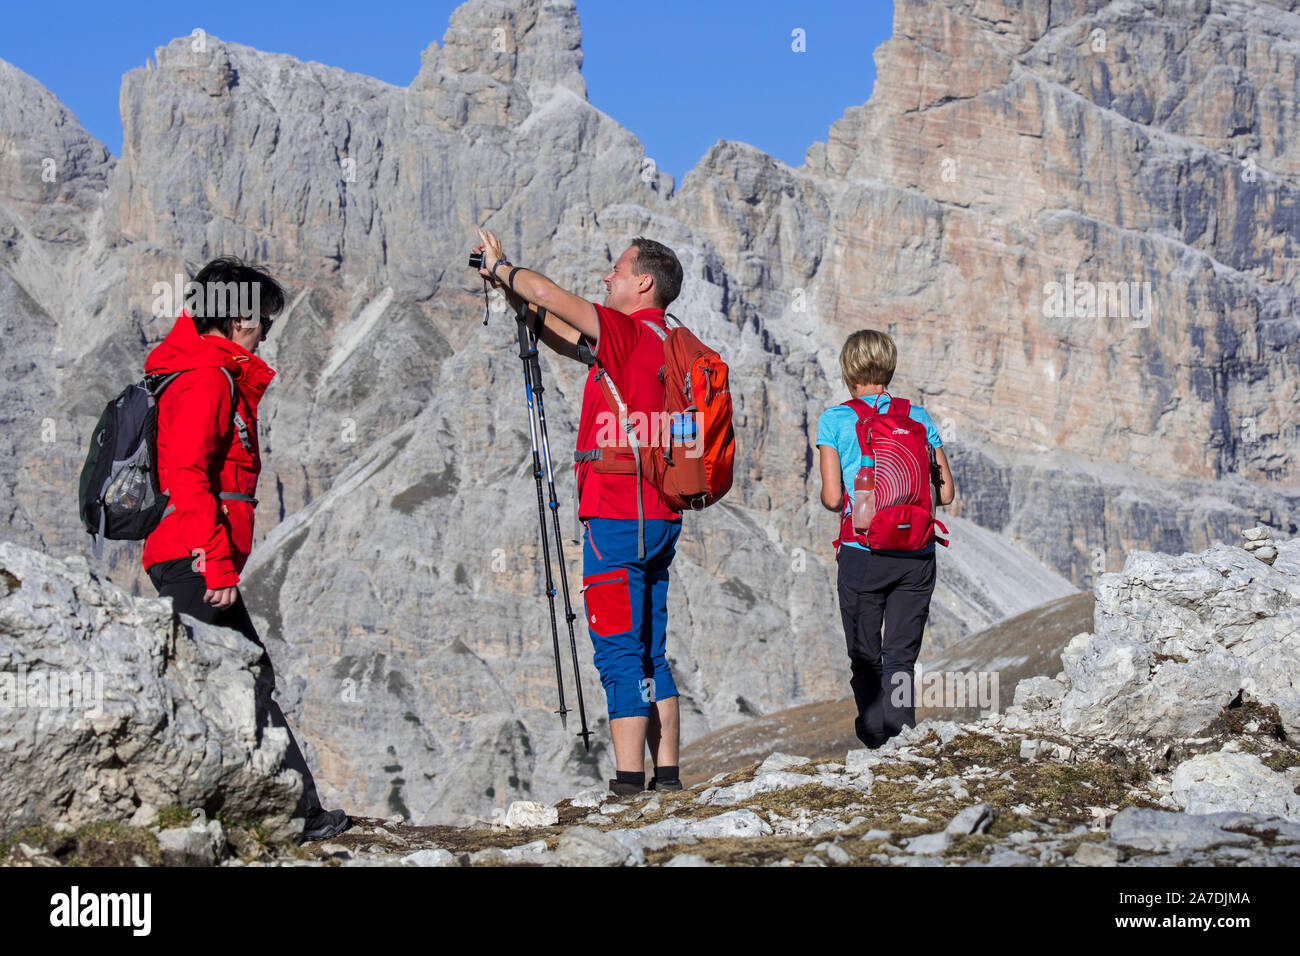 Tourists taking pictures of mountain scenery in the Sexten Dolomites / Dolomiti di Sesto / Sextener Dolomiten, nature reserve in South Tyrol, Italy Stock Photo